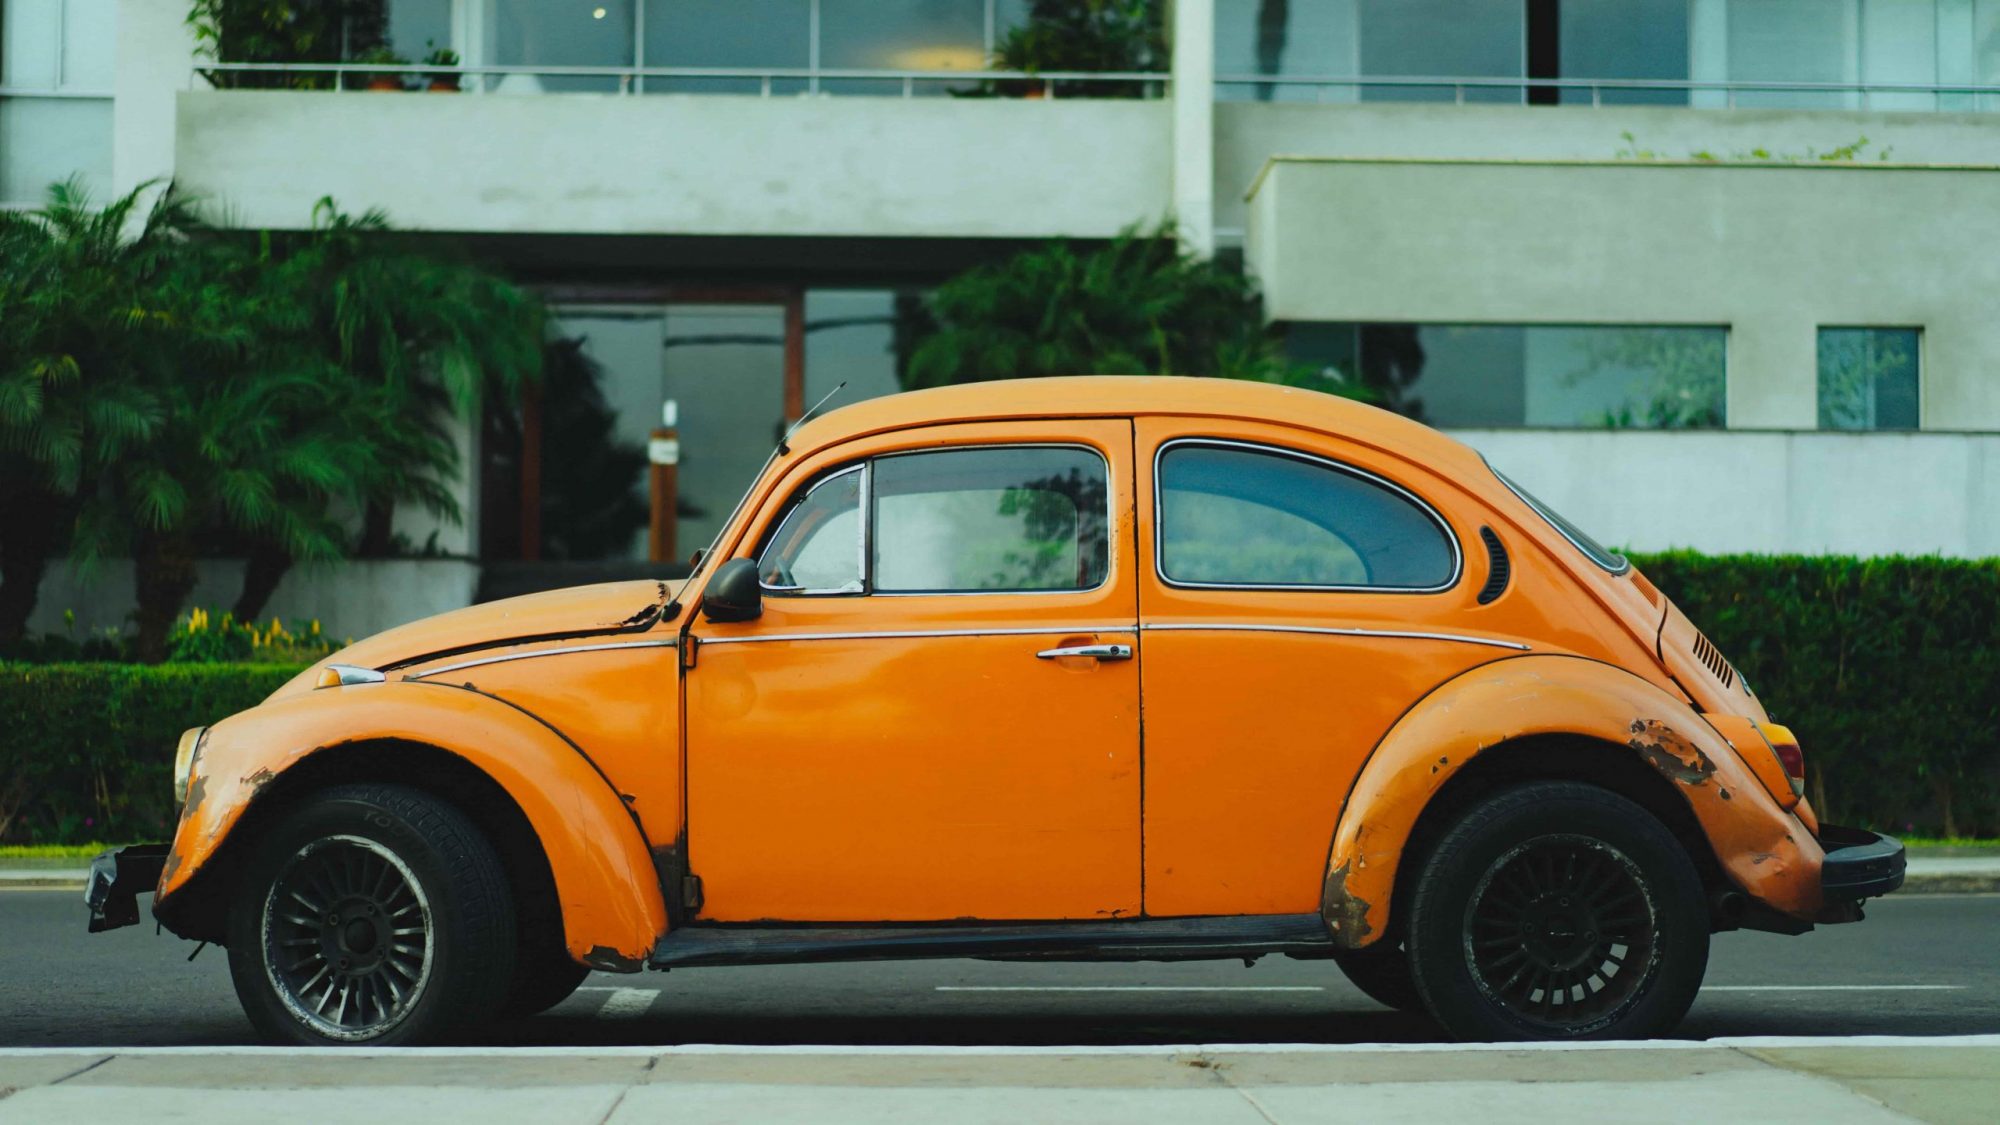 An old, orange Volkswagen Beetle; the type of second-hand vehicle most people don’t want.